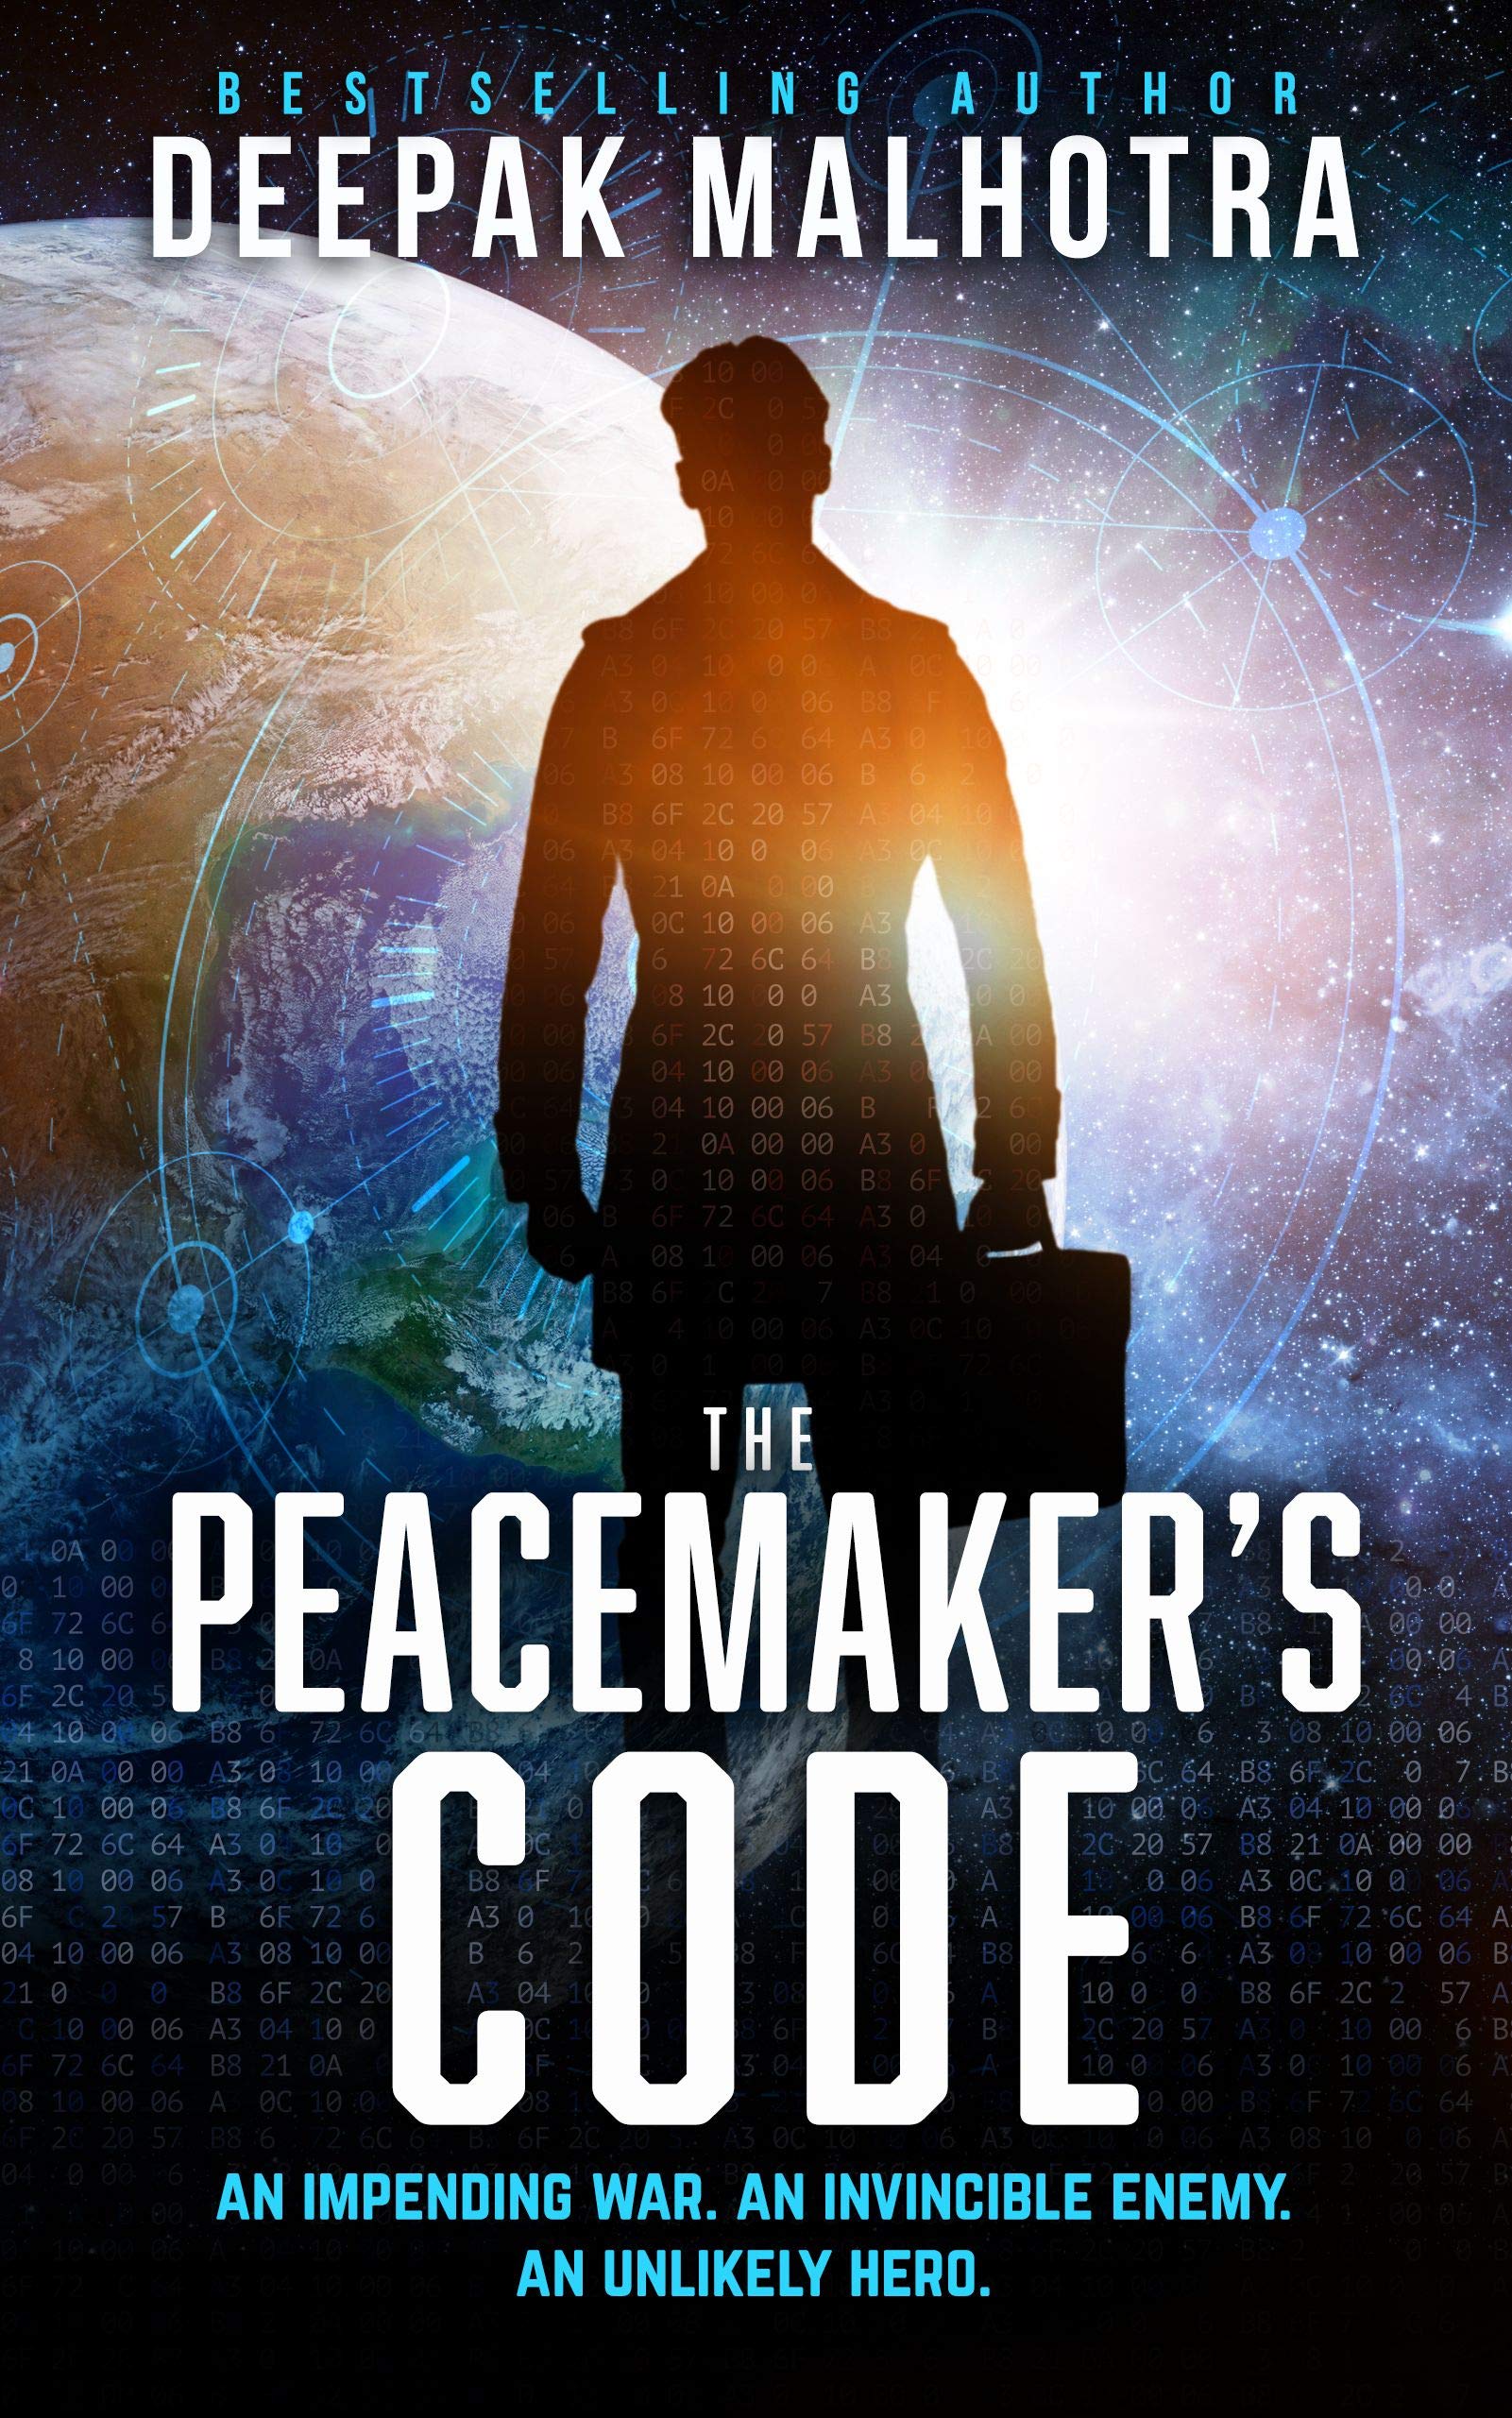 The Peacemaker’s Code